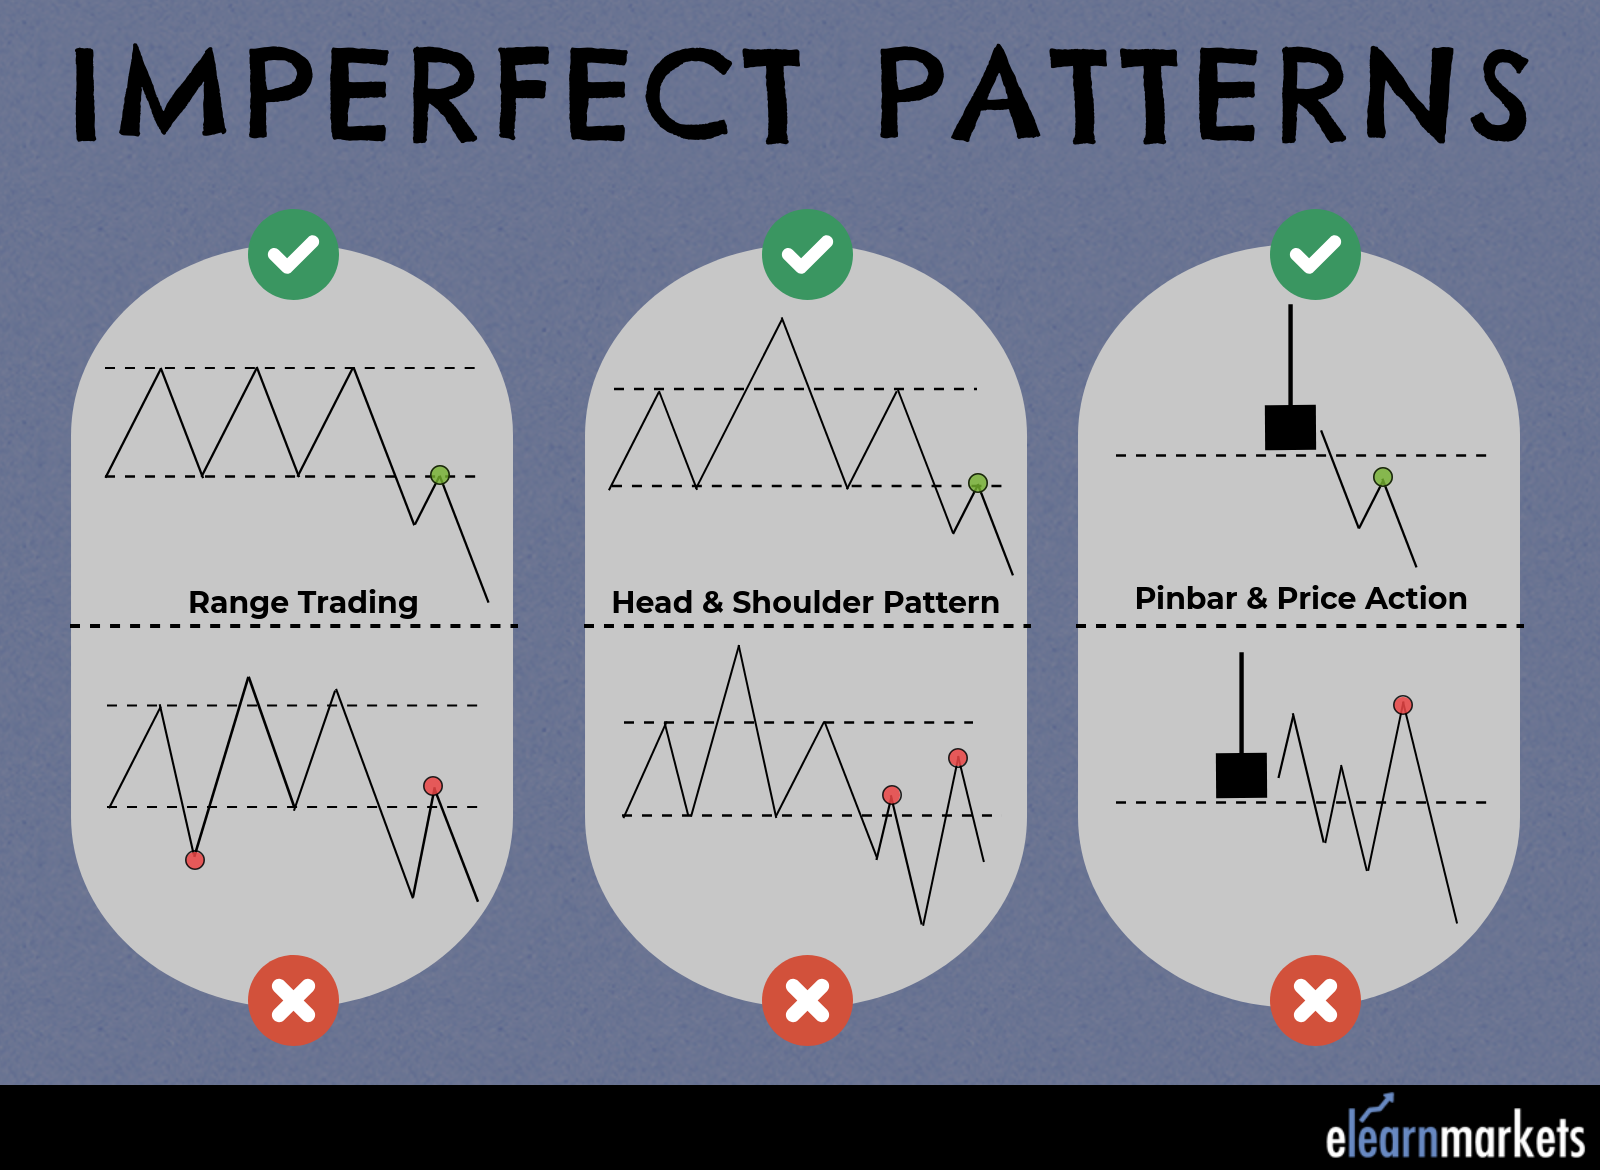 Imperfect Patterns in technical analysis